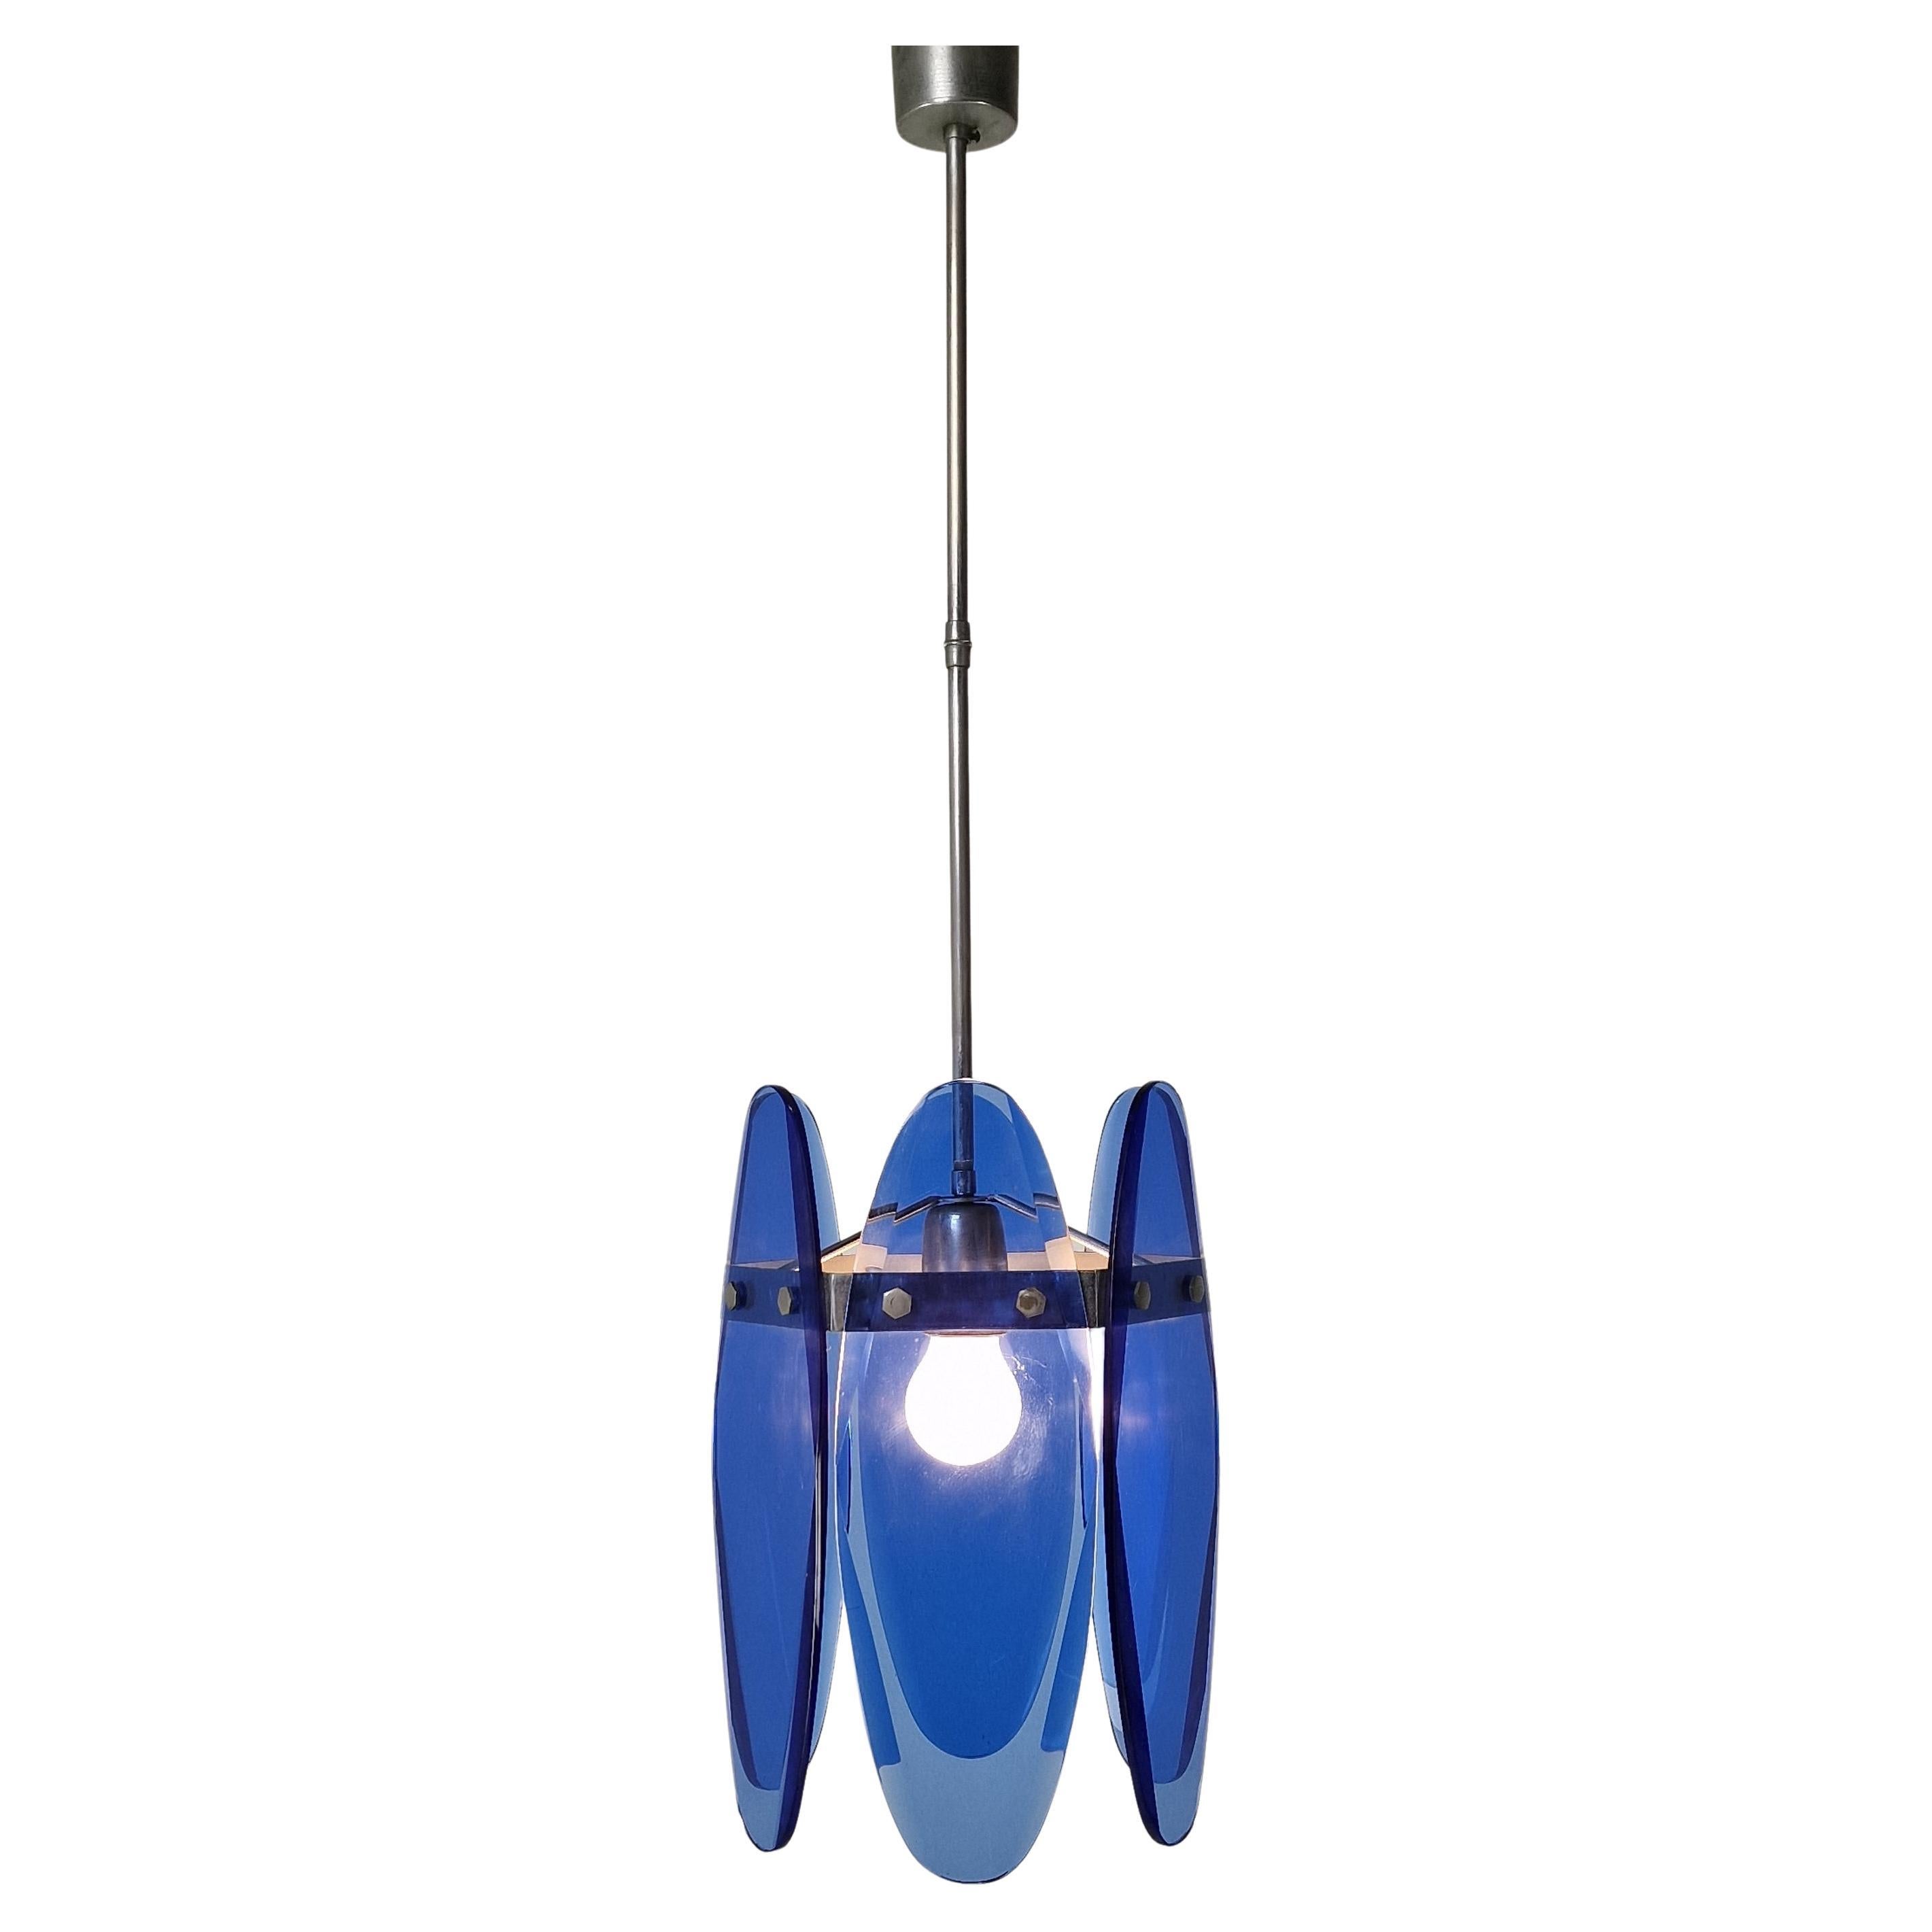 Mid-Century Modern Blue Glass Chandelier or Pendant by Veca, Italy 1970's For Sale